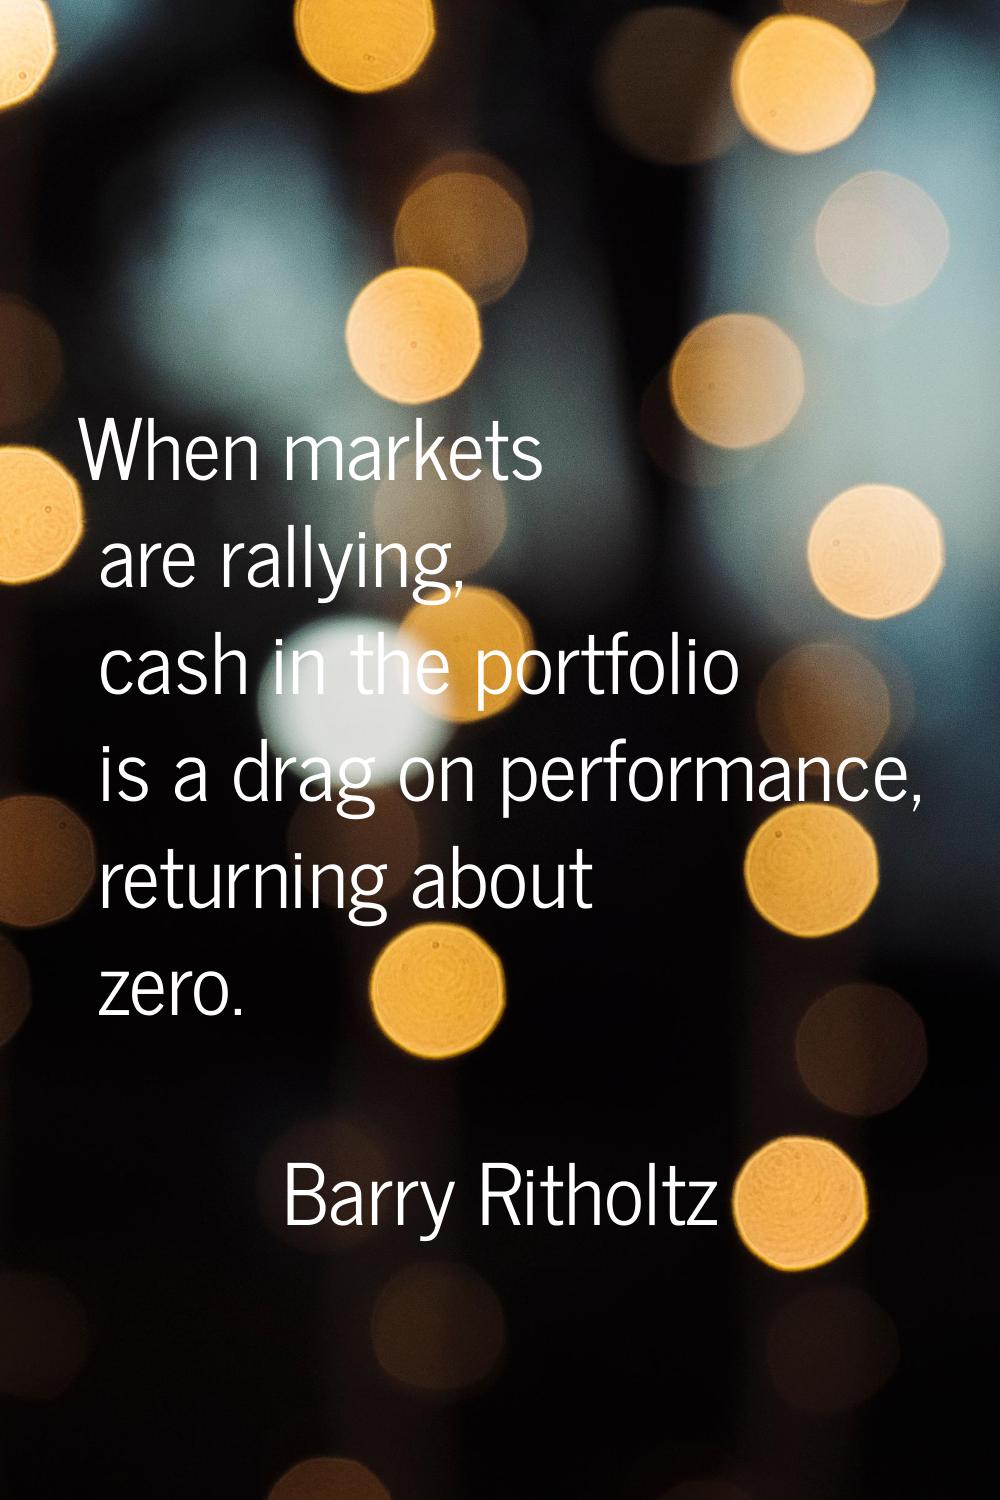 When markets are rallying, cash in the portfolio is a drag on performance, returning about zero.